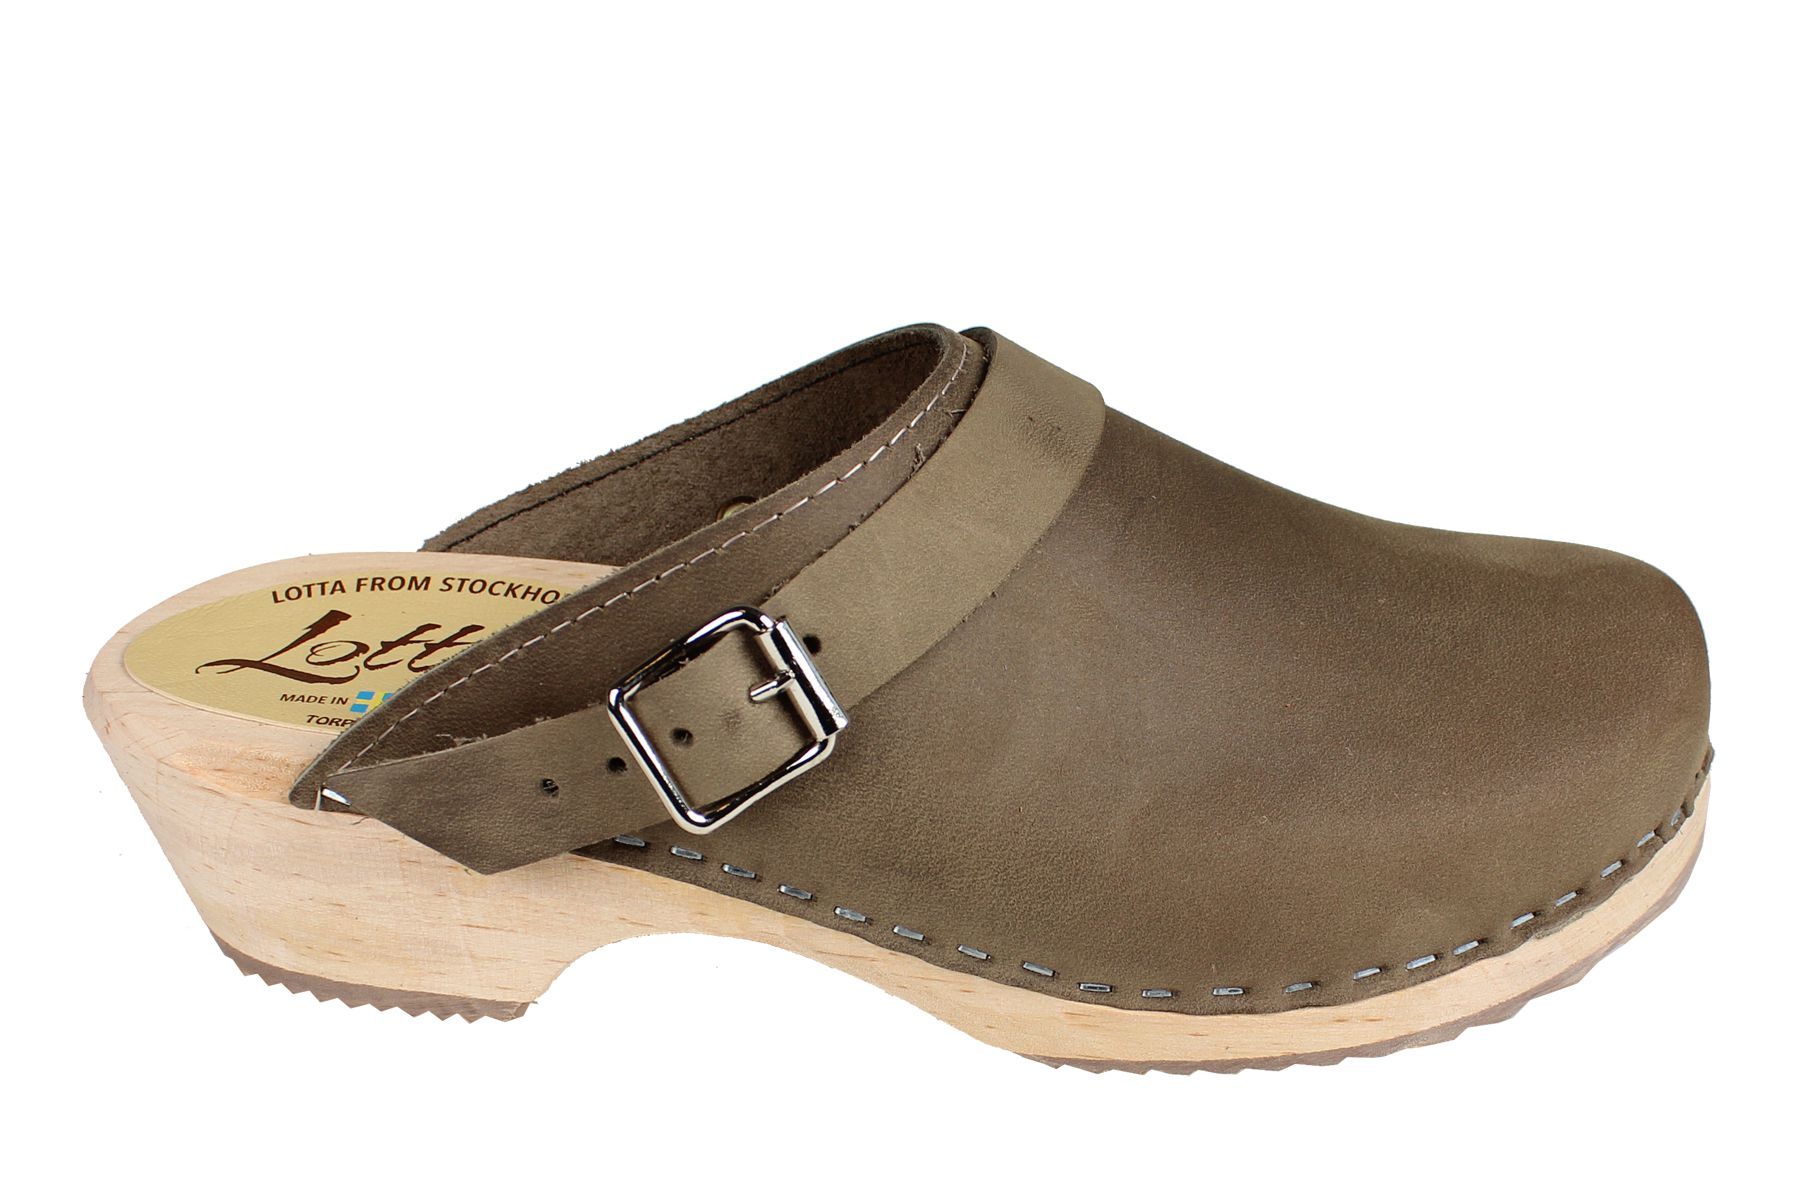 Classic taupe Clogs with Moveable Strap